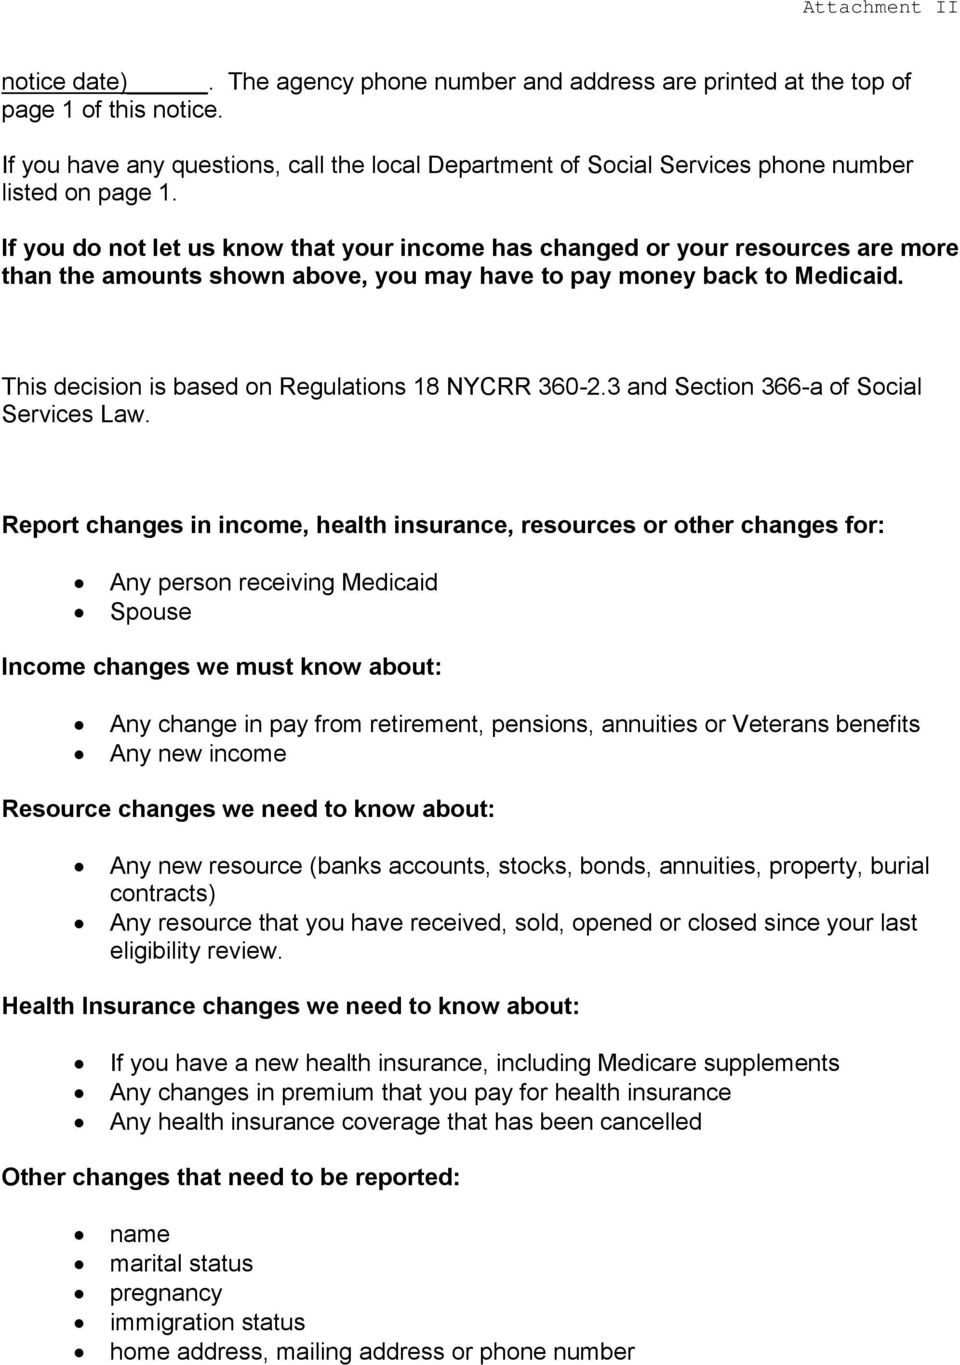 If you do not let us know that your income has changed or your resources are more than the amounts shown above, you may have to pay money back to Medicaid.